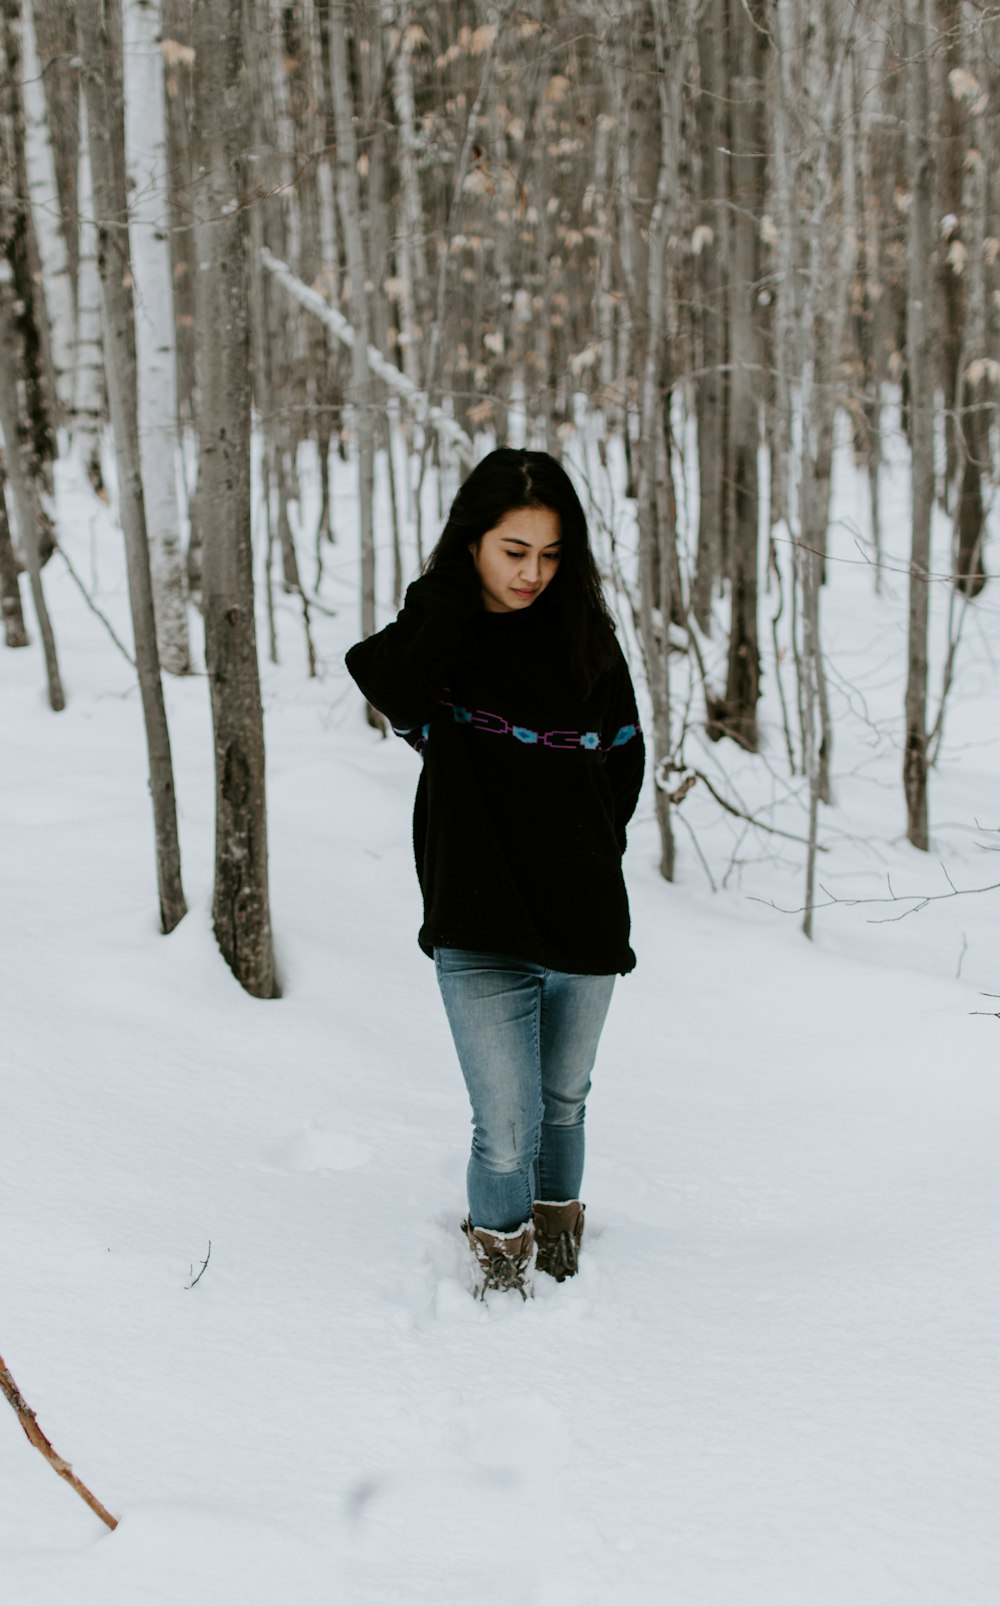 woman in black shirt standing on snow